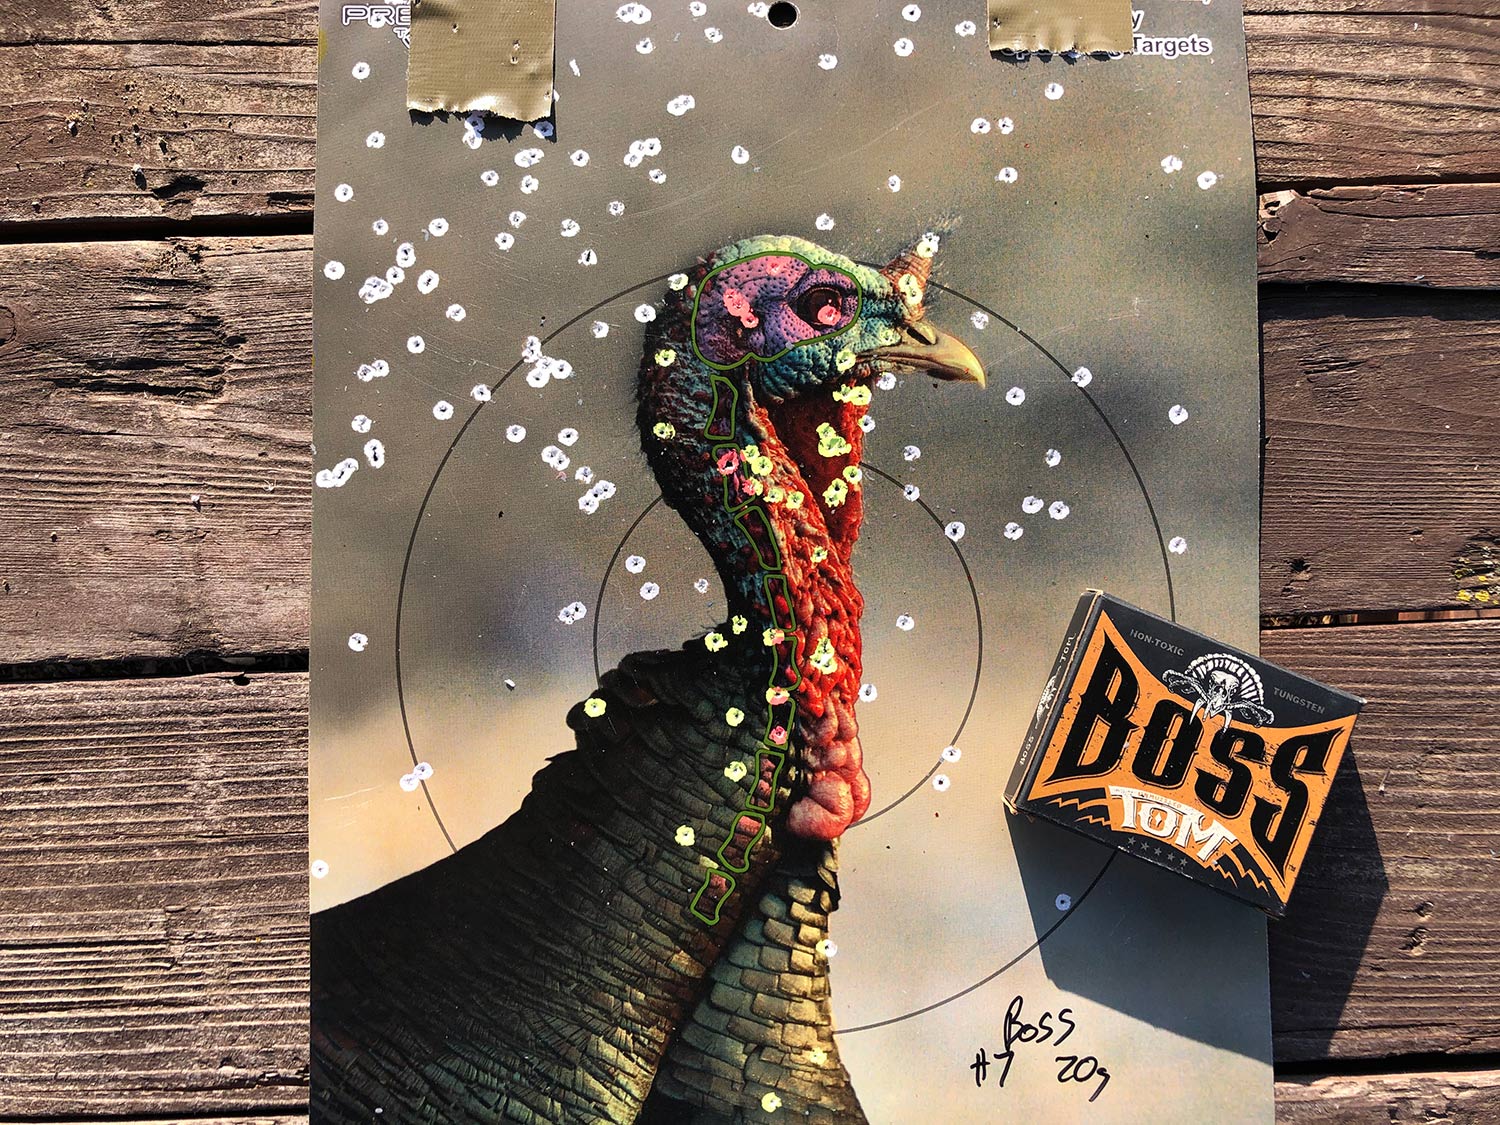 A turkey target riddled with pellet holes.